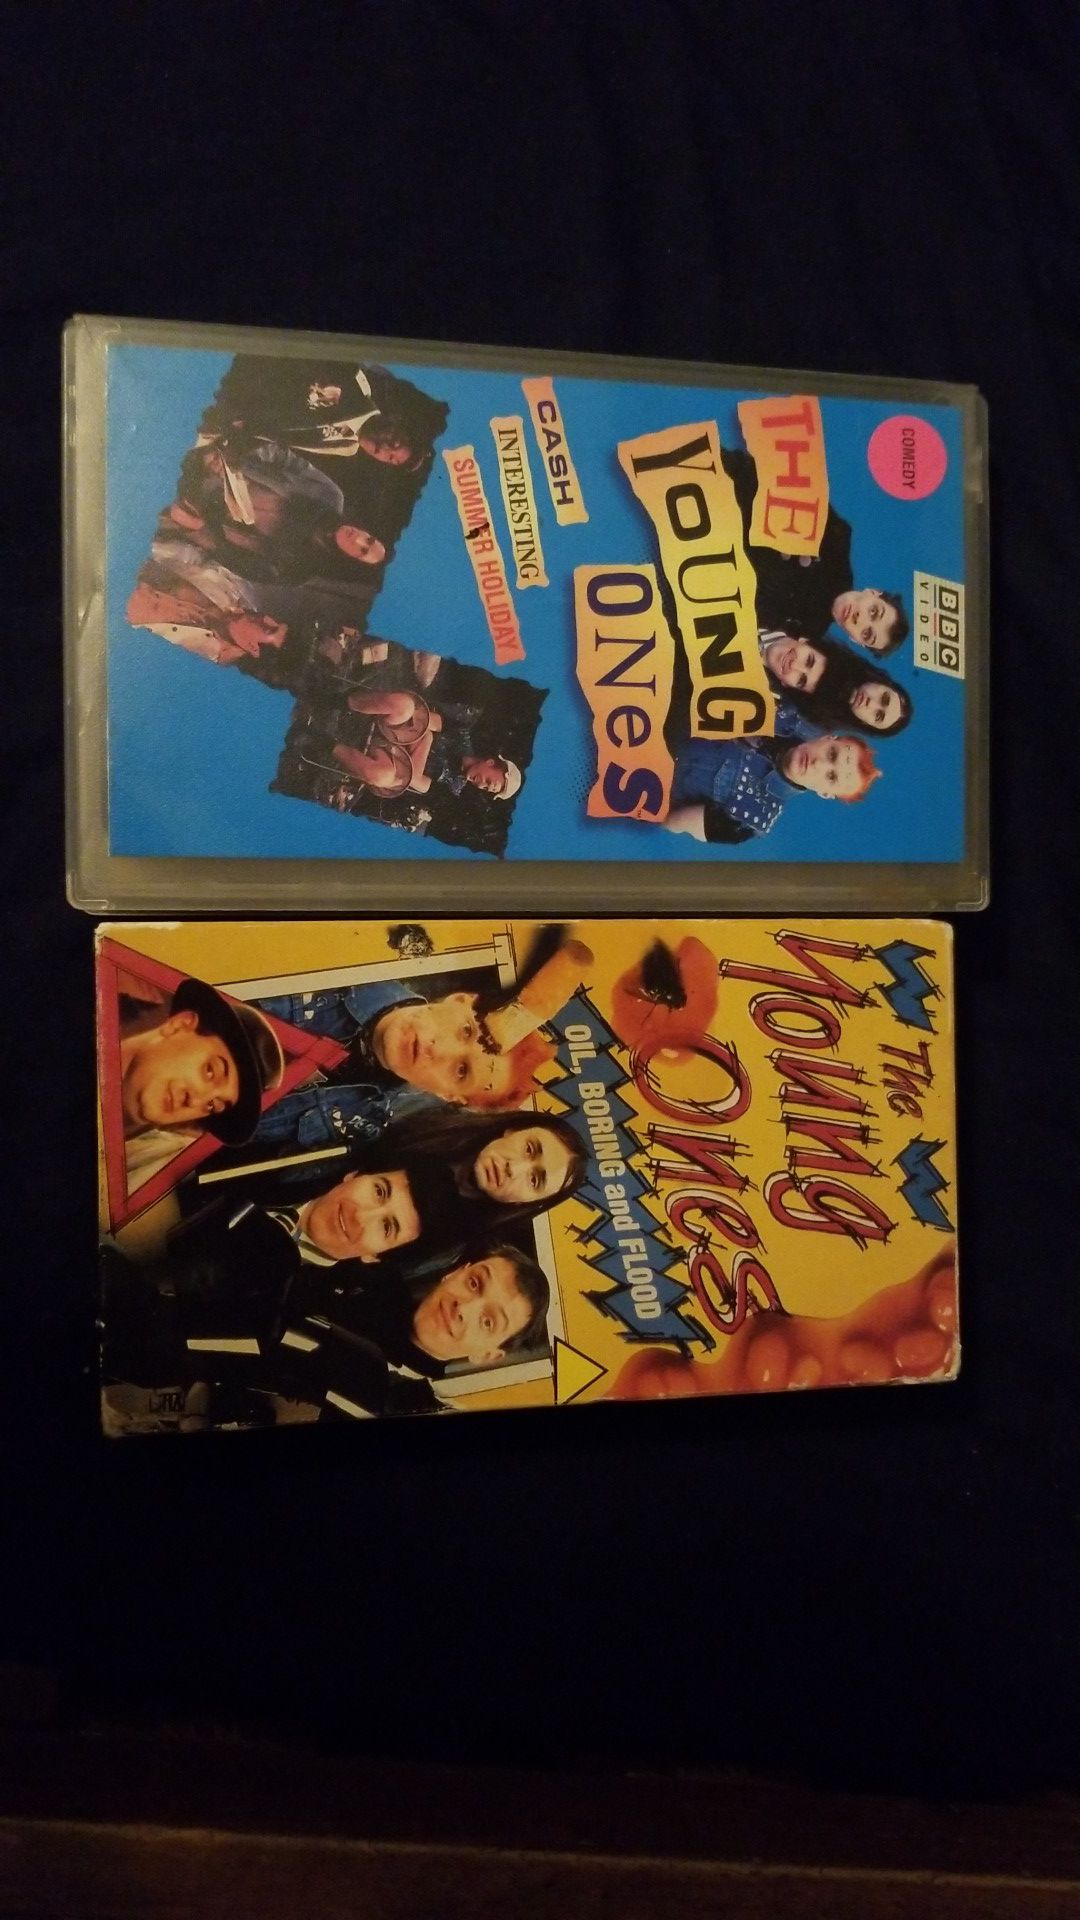 The young ones VHS